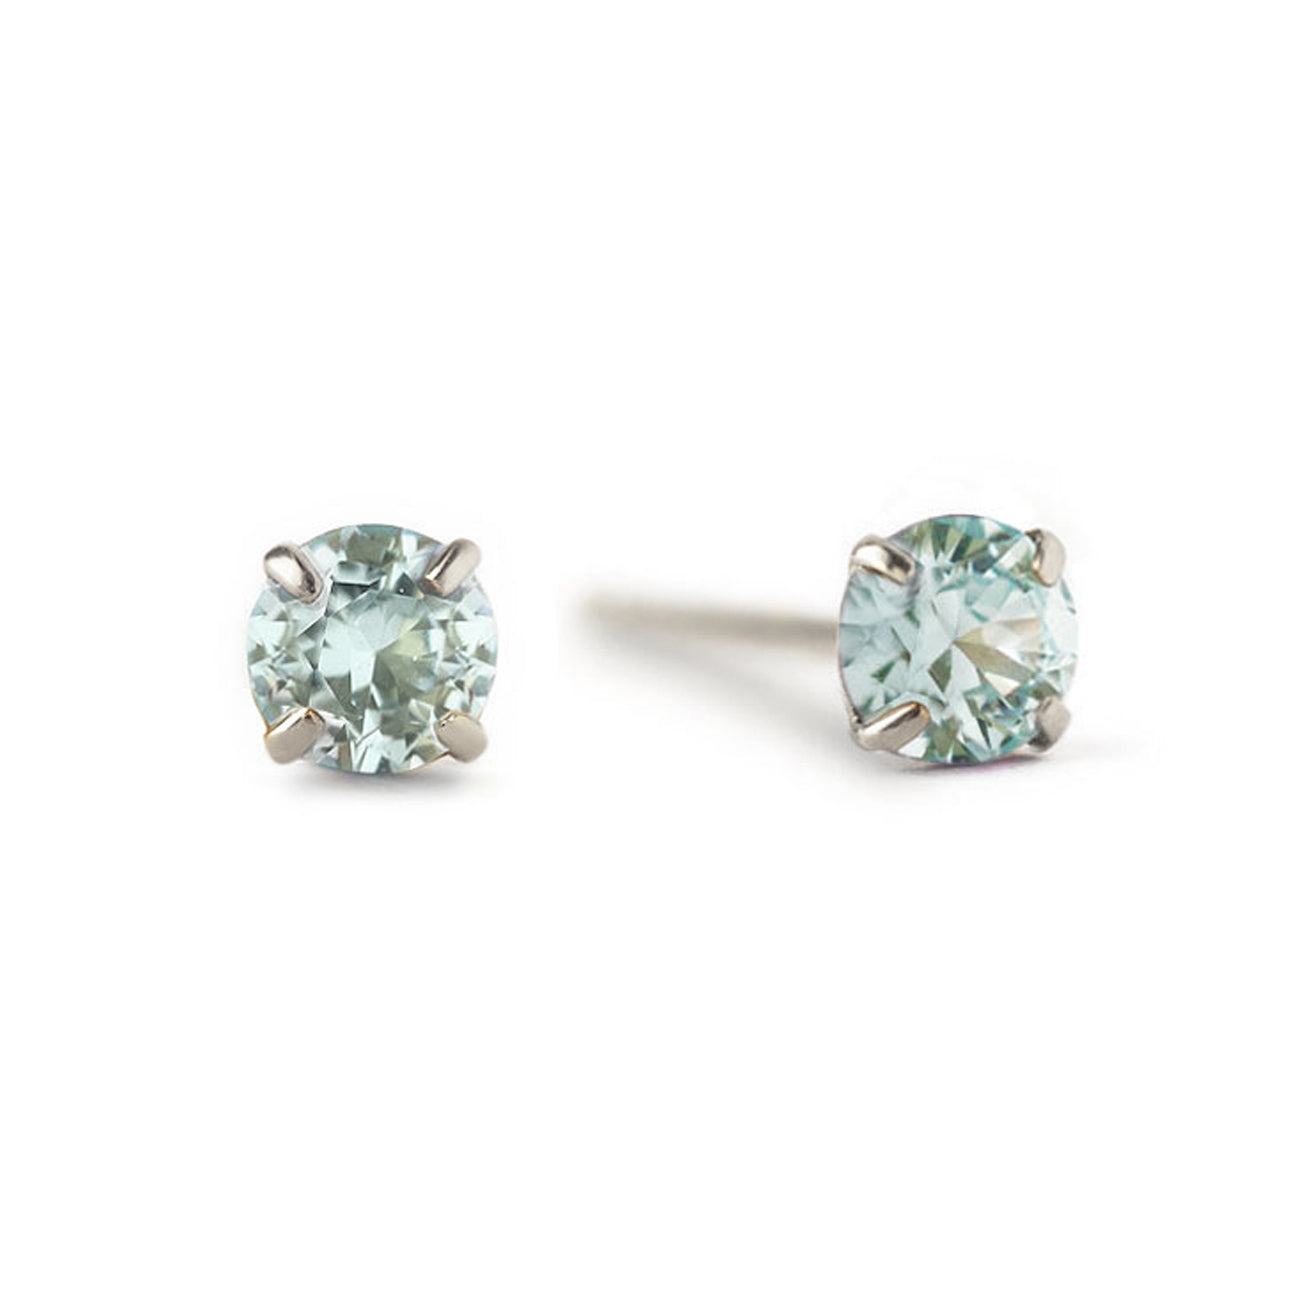 Only 45.00 usd for Birthstone Studs Aquamarine Online at the Shop